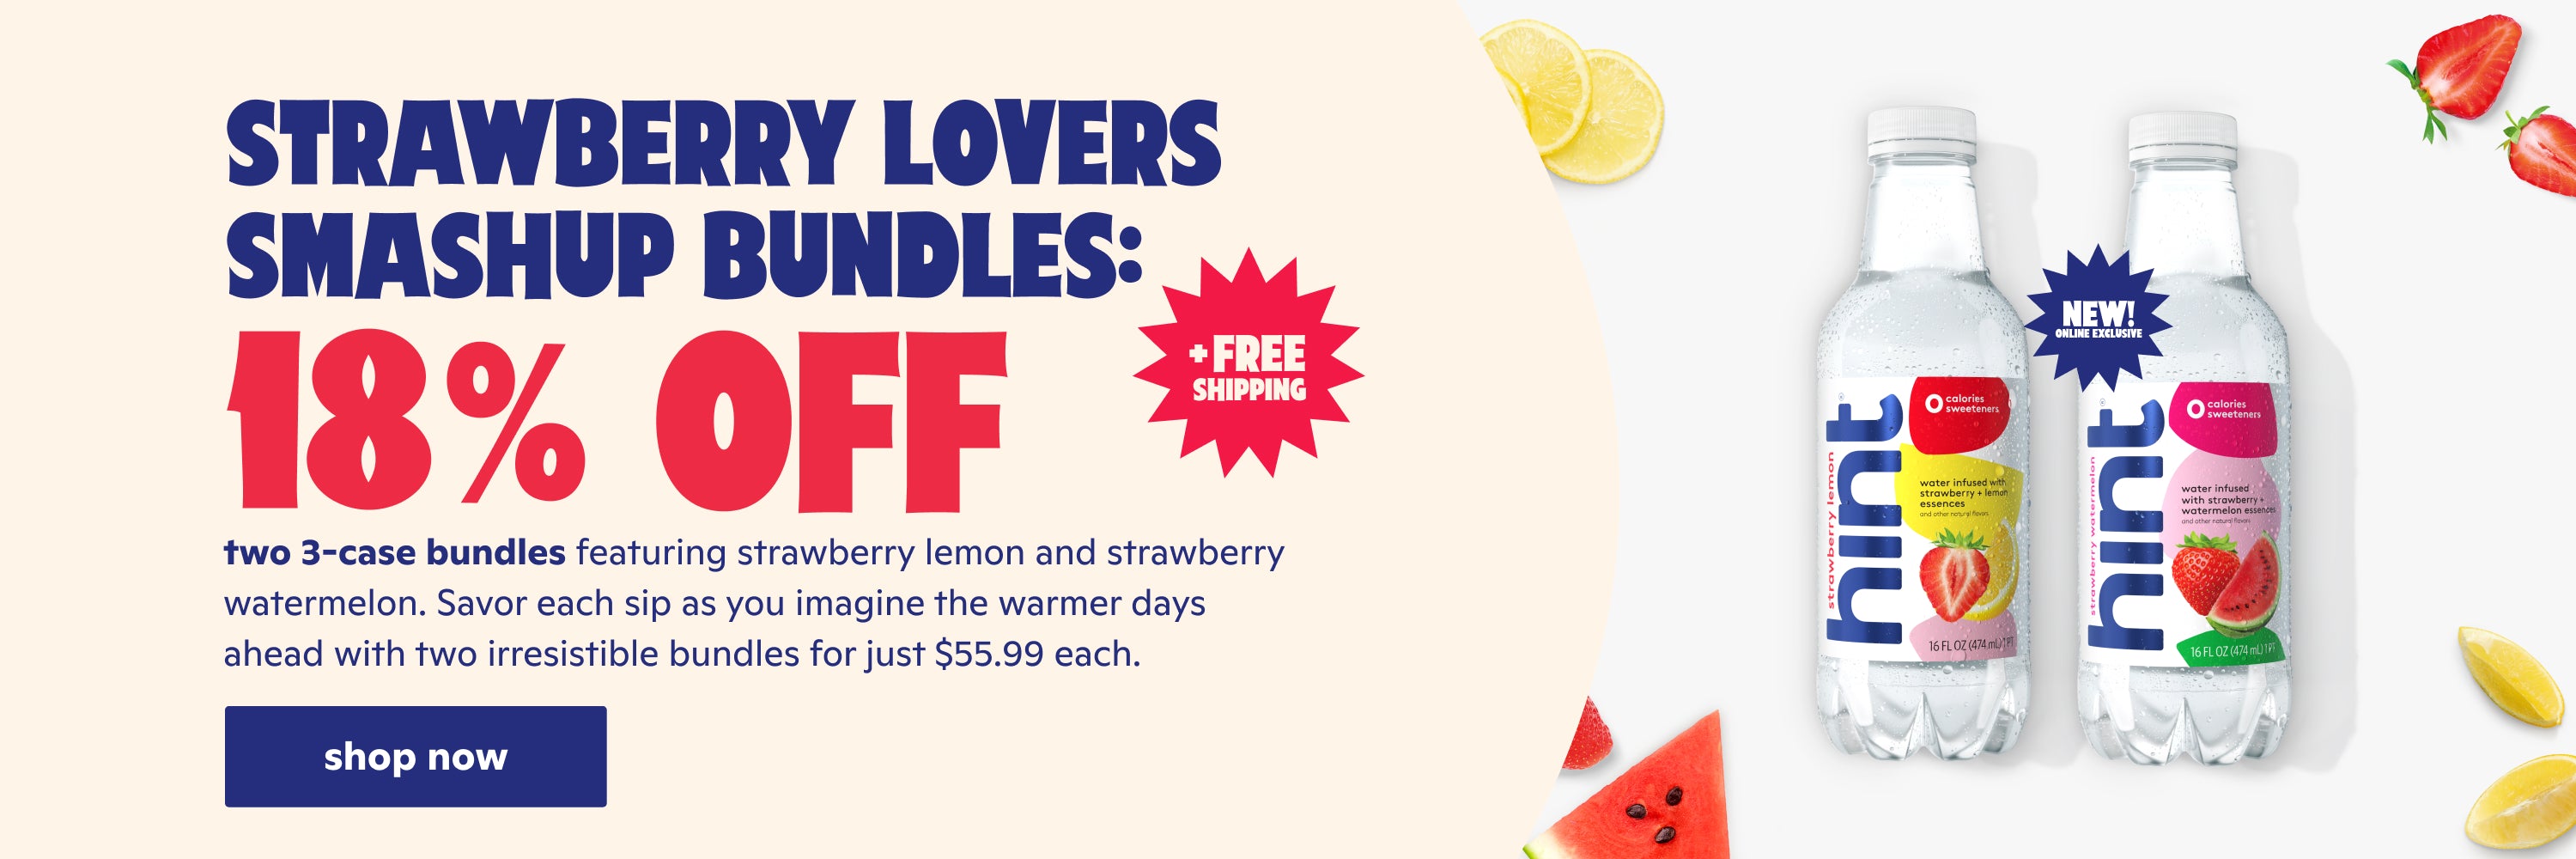 18% off strawberry lovers bundle + FREE shipping. Shop now.